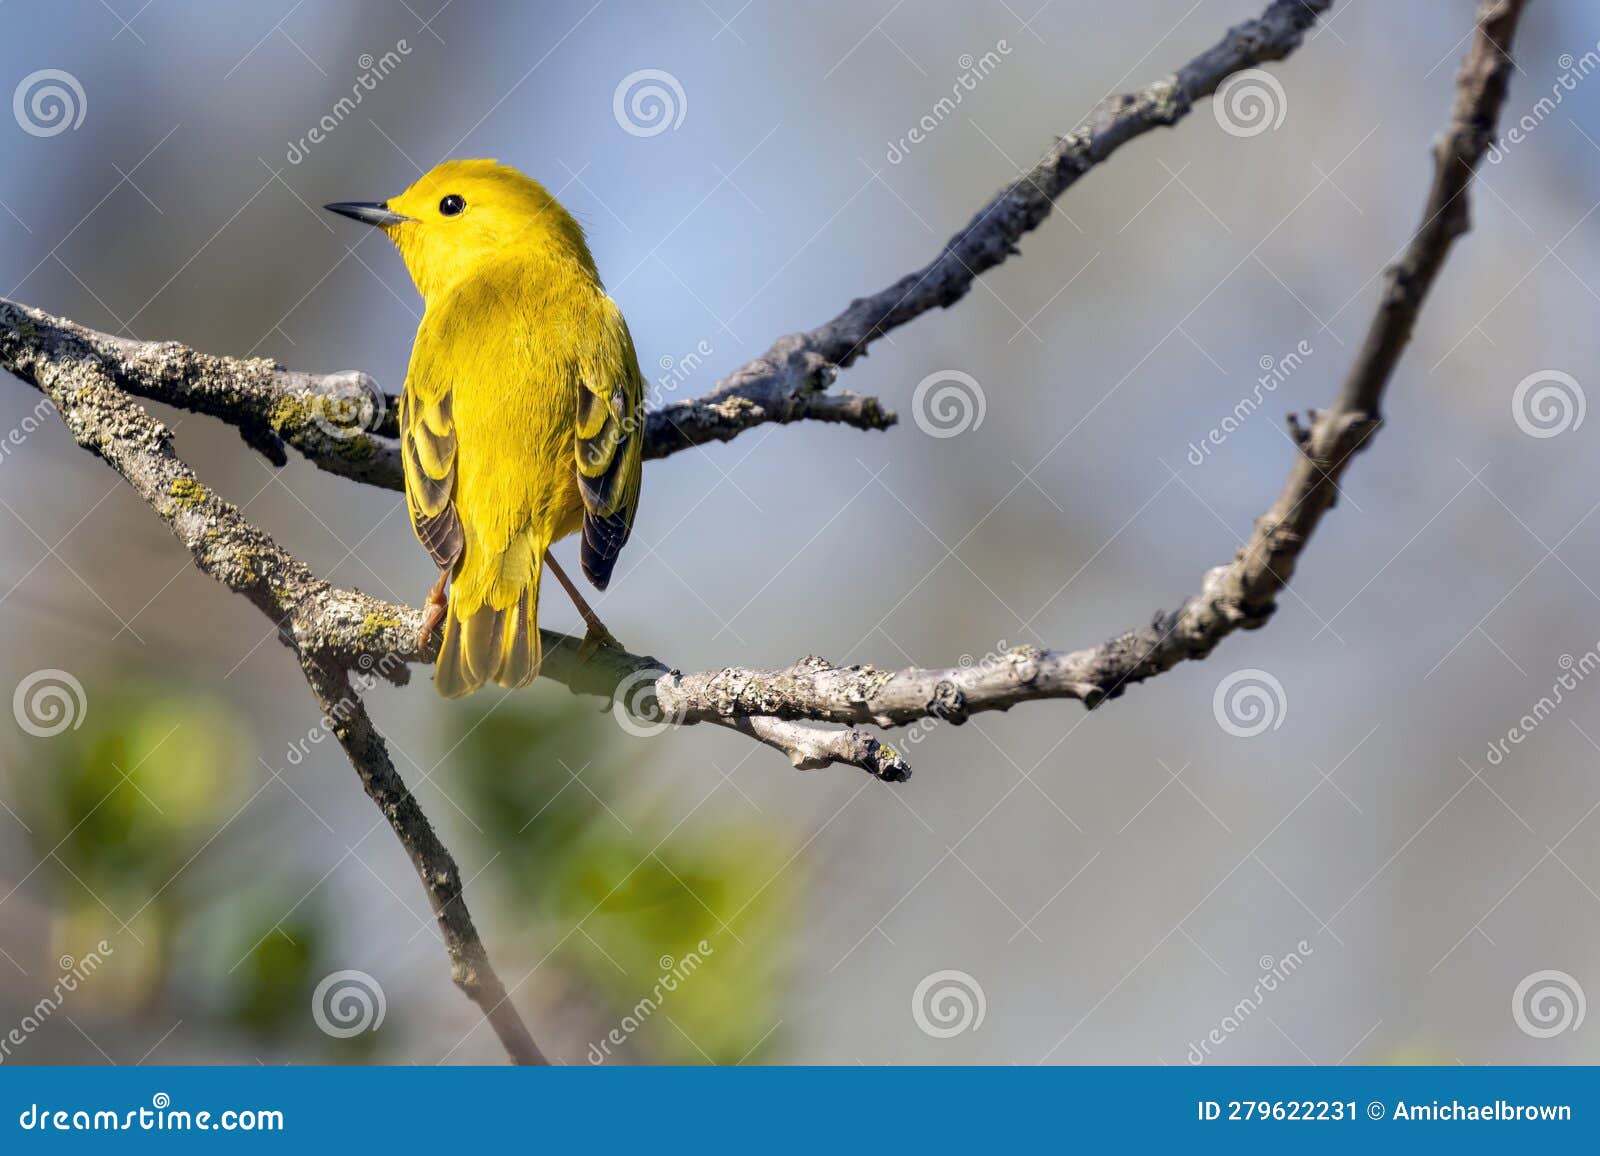 yellow warble  perched on a tree branch